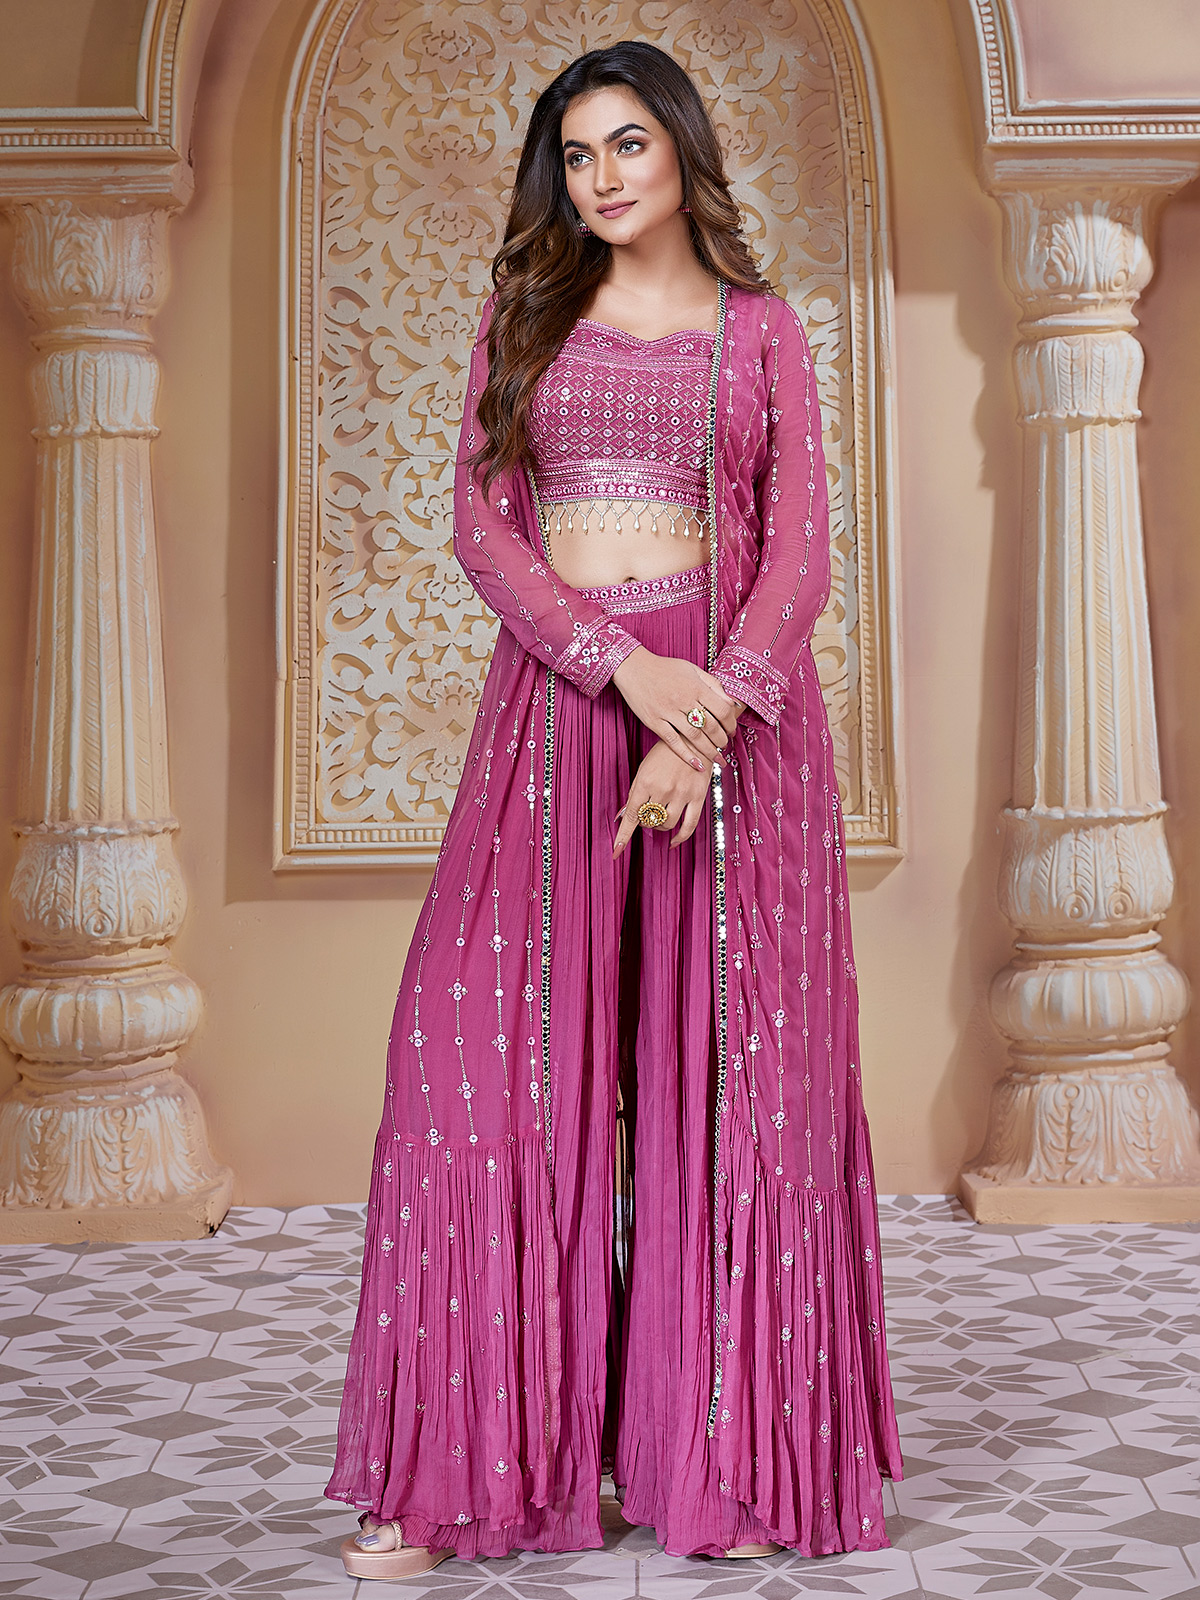 Buy Indian Girls Gowns Dress Online in India at G3fashion